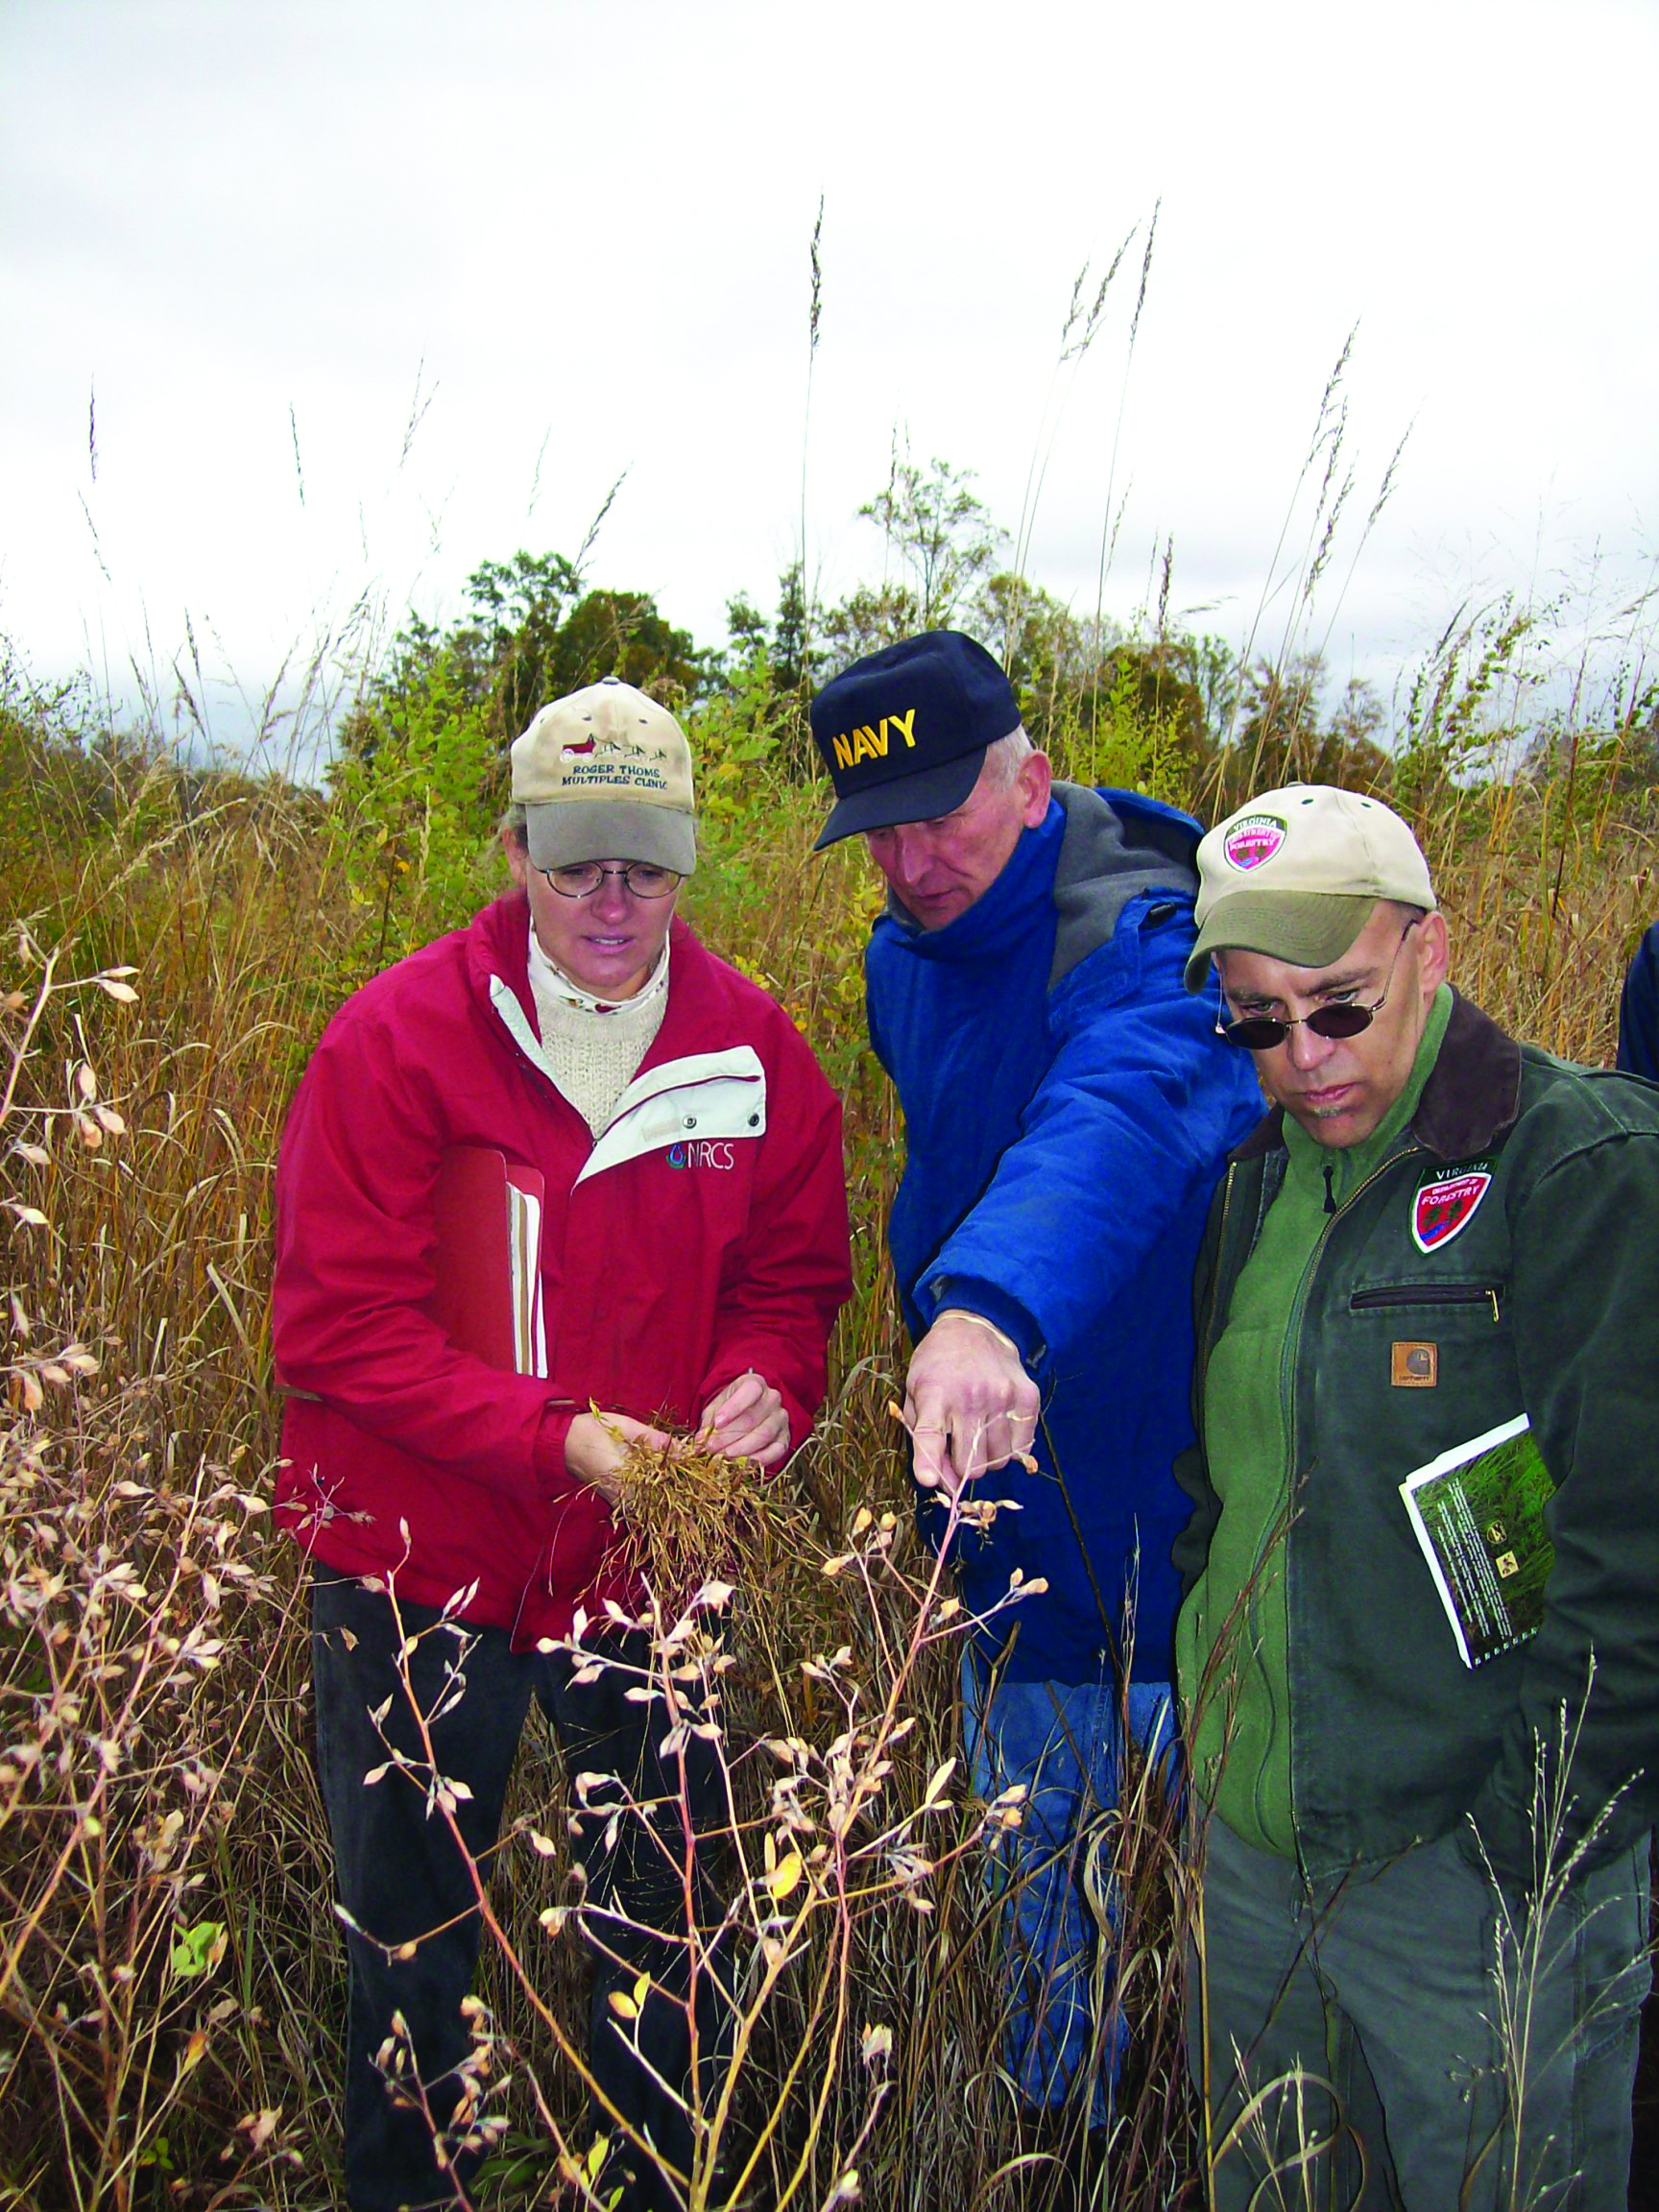 Three people examine grasses in a field.